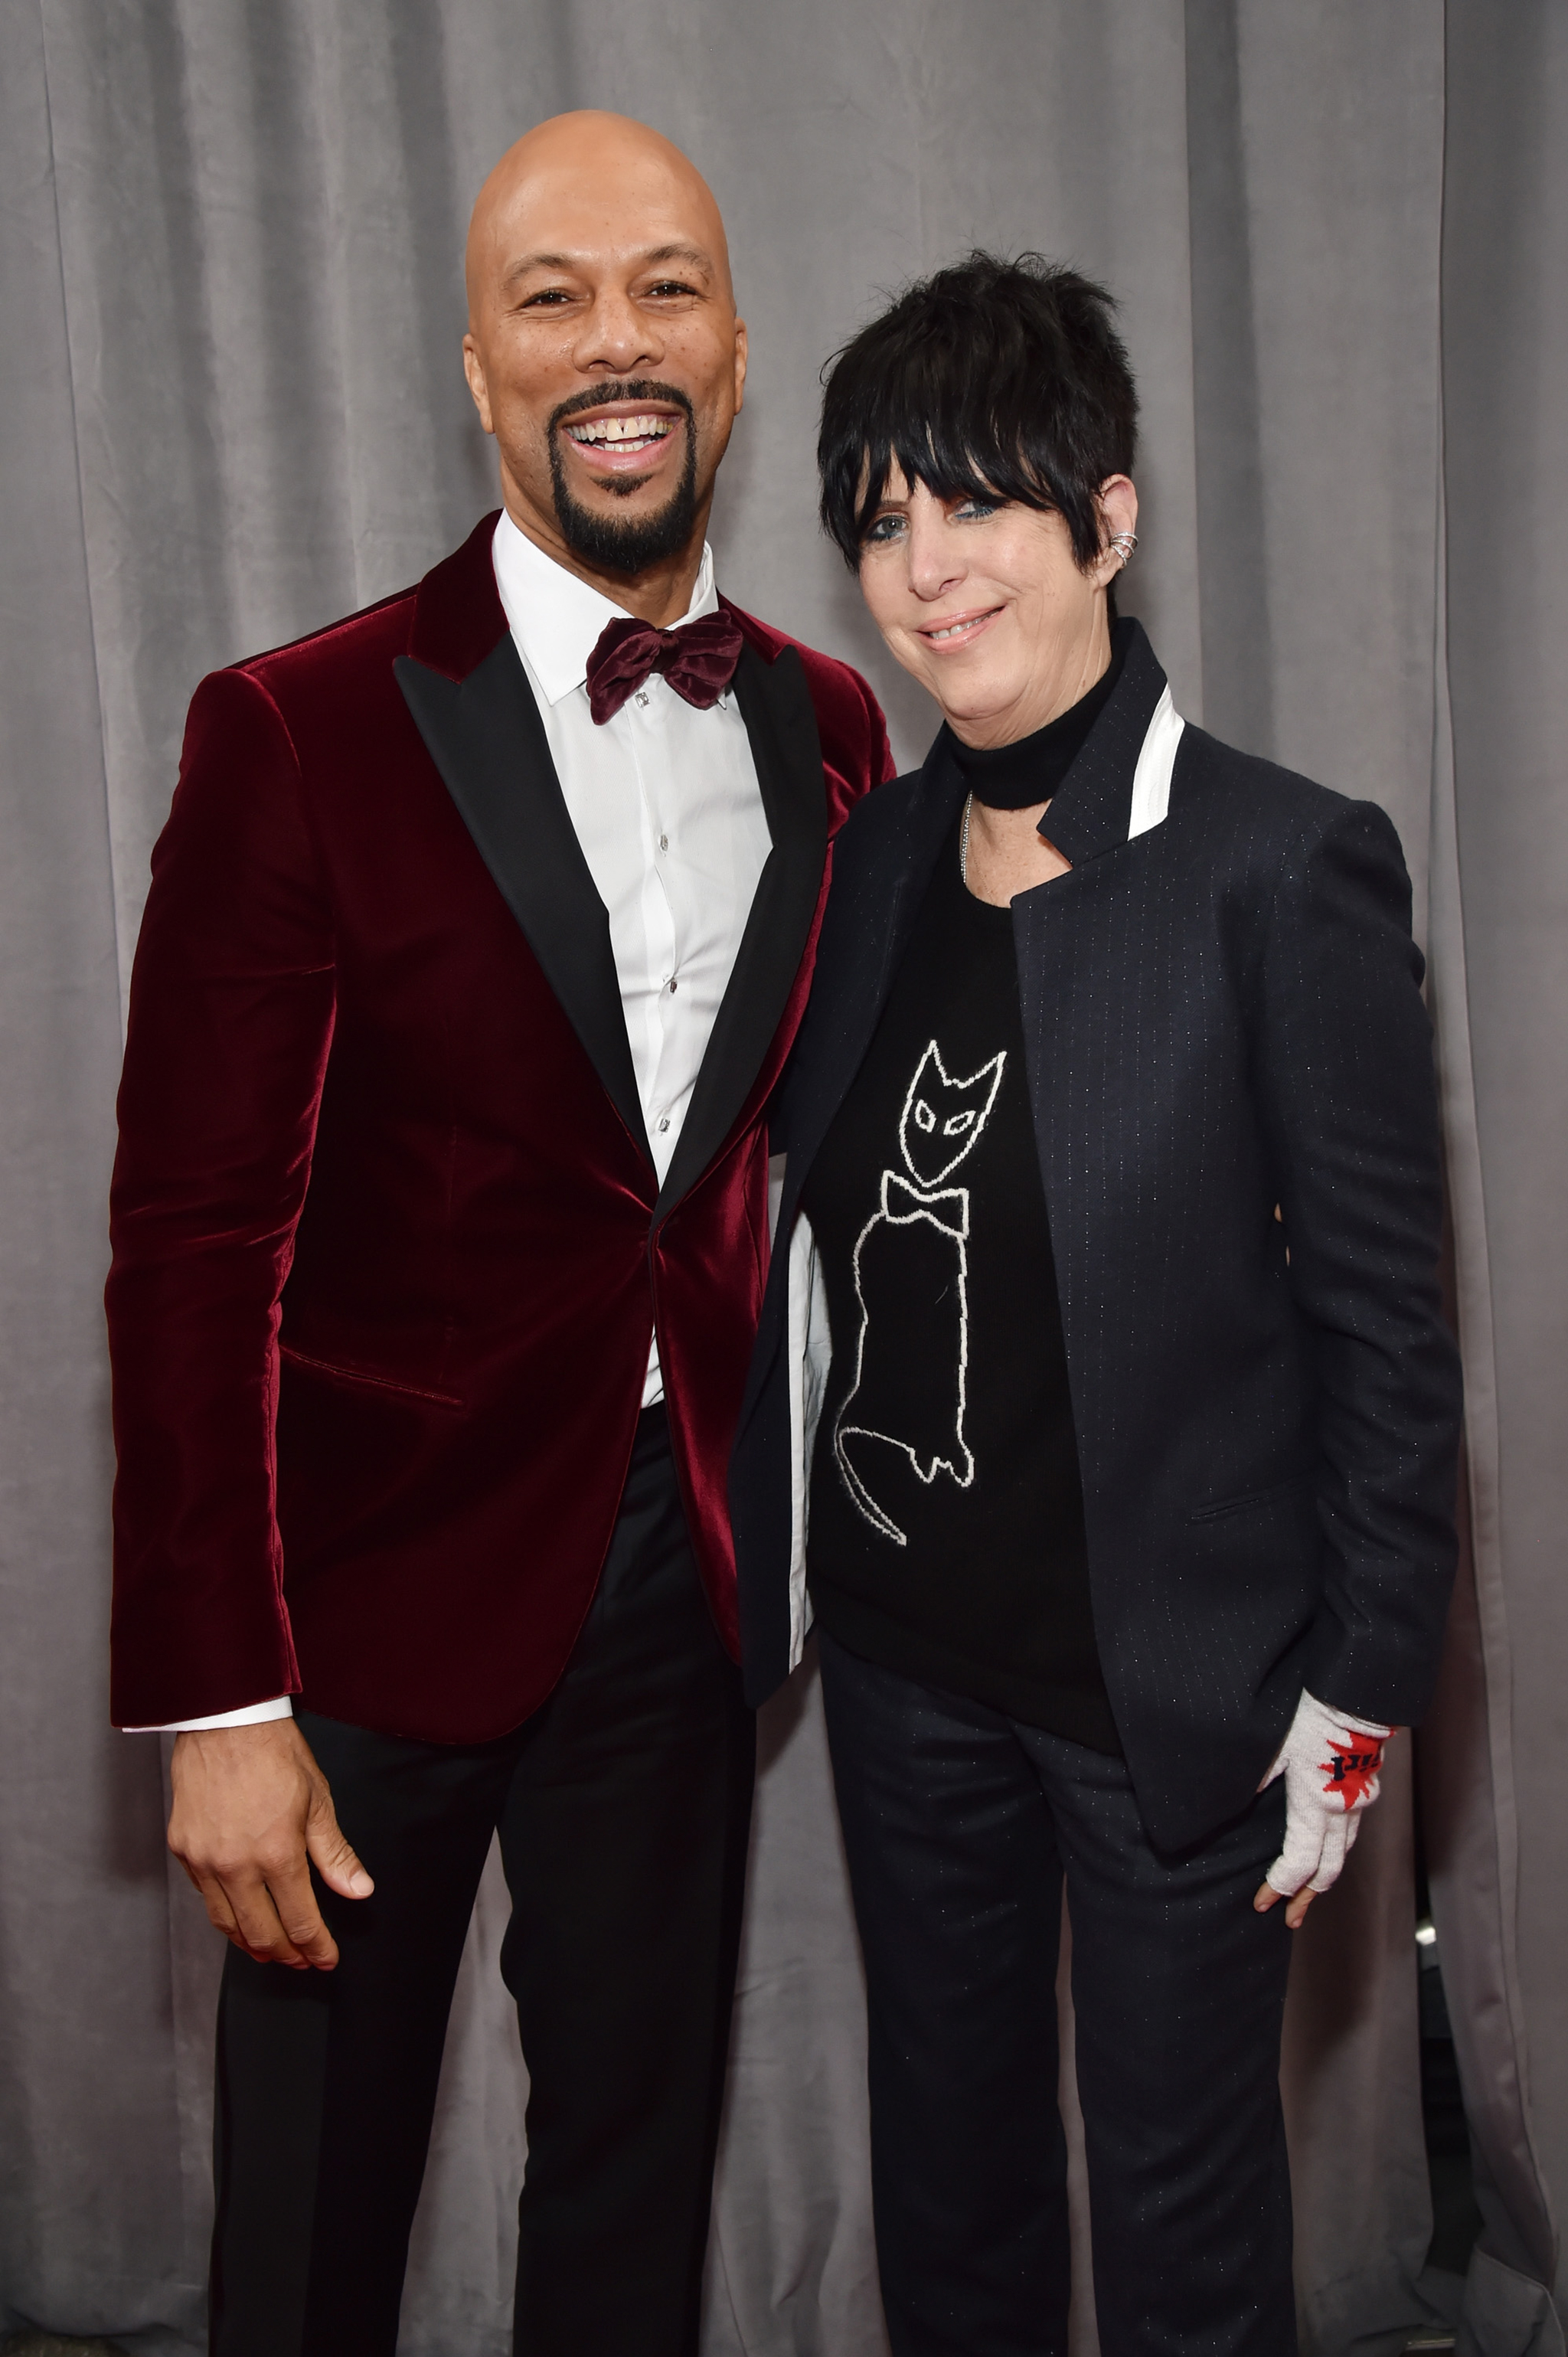 Recording artist Common and songwriter Diane Warren attend the 60th Annual GRAMMY Awards at Madison Square Garden on January 28, 2018 in New York City.